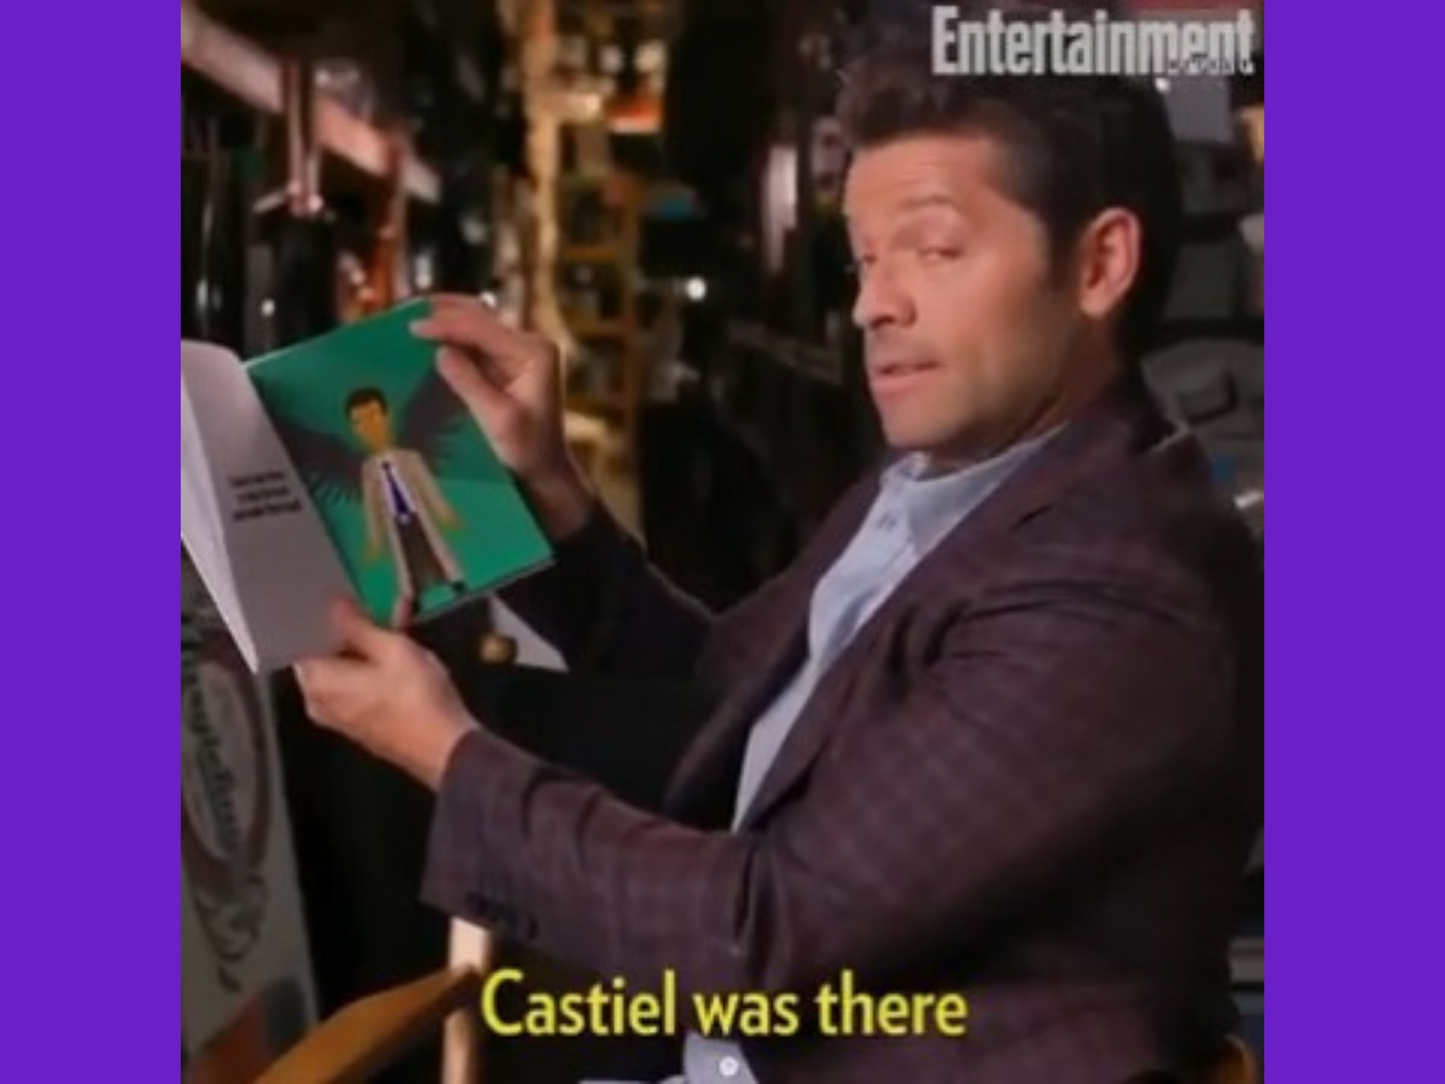 A Winchester Bedtime Story